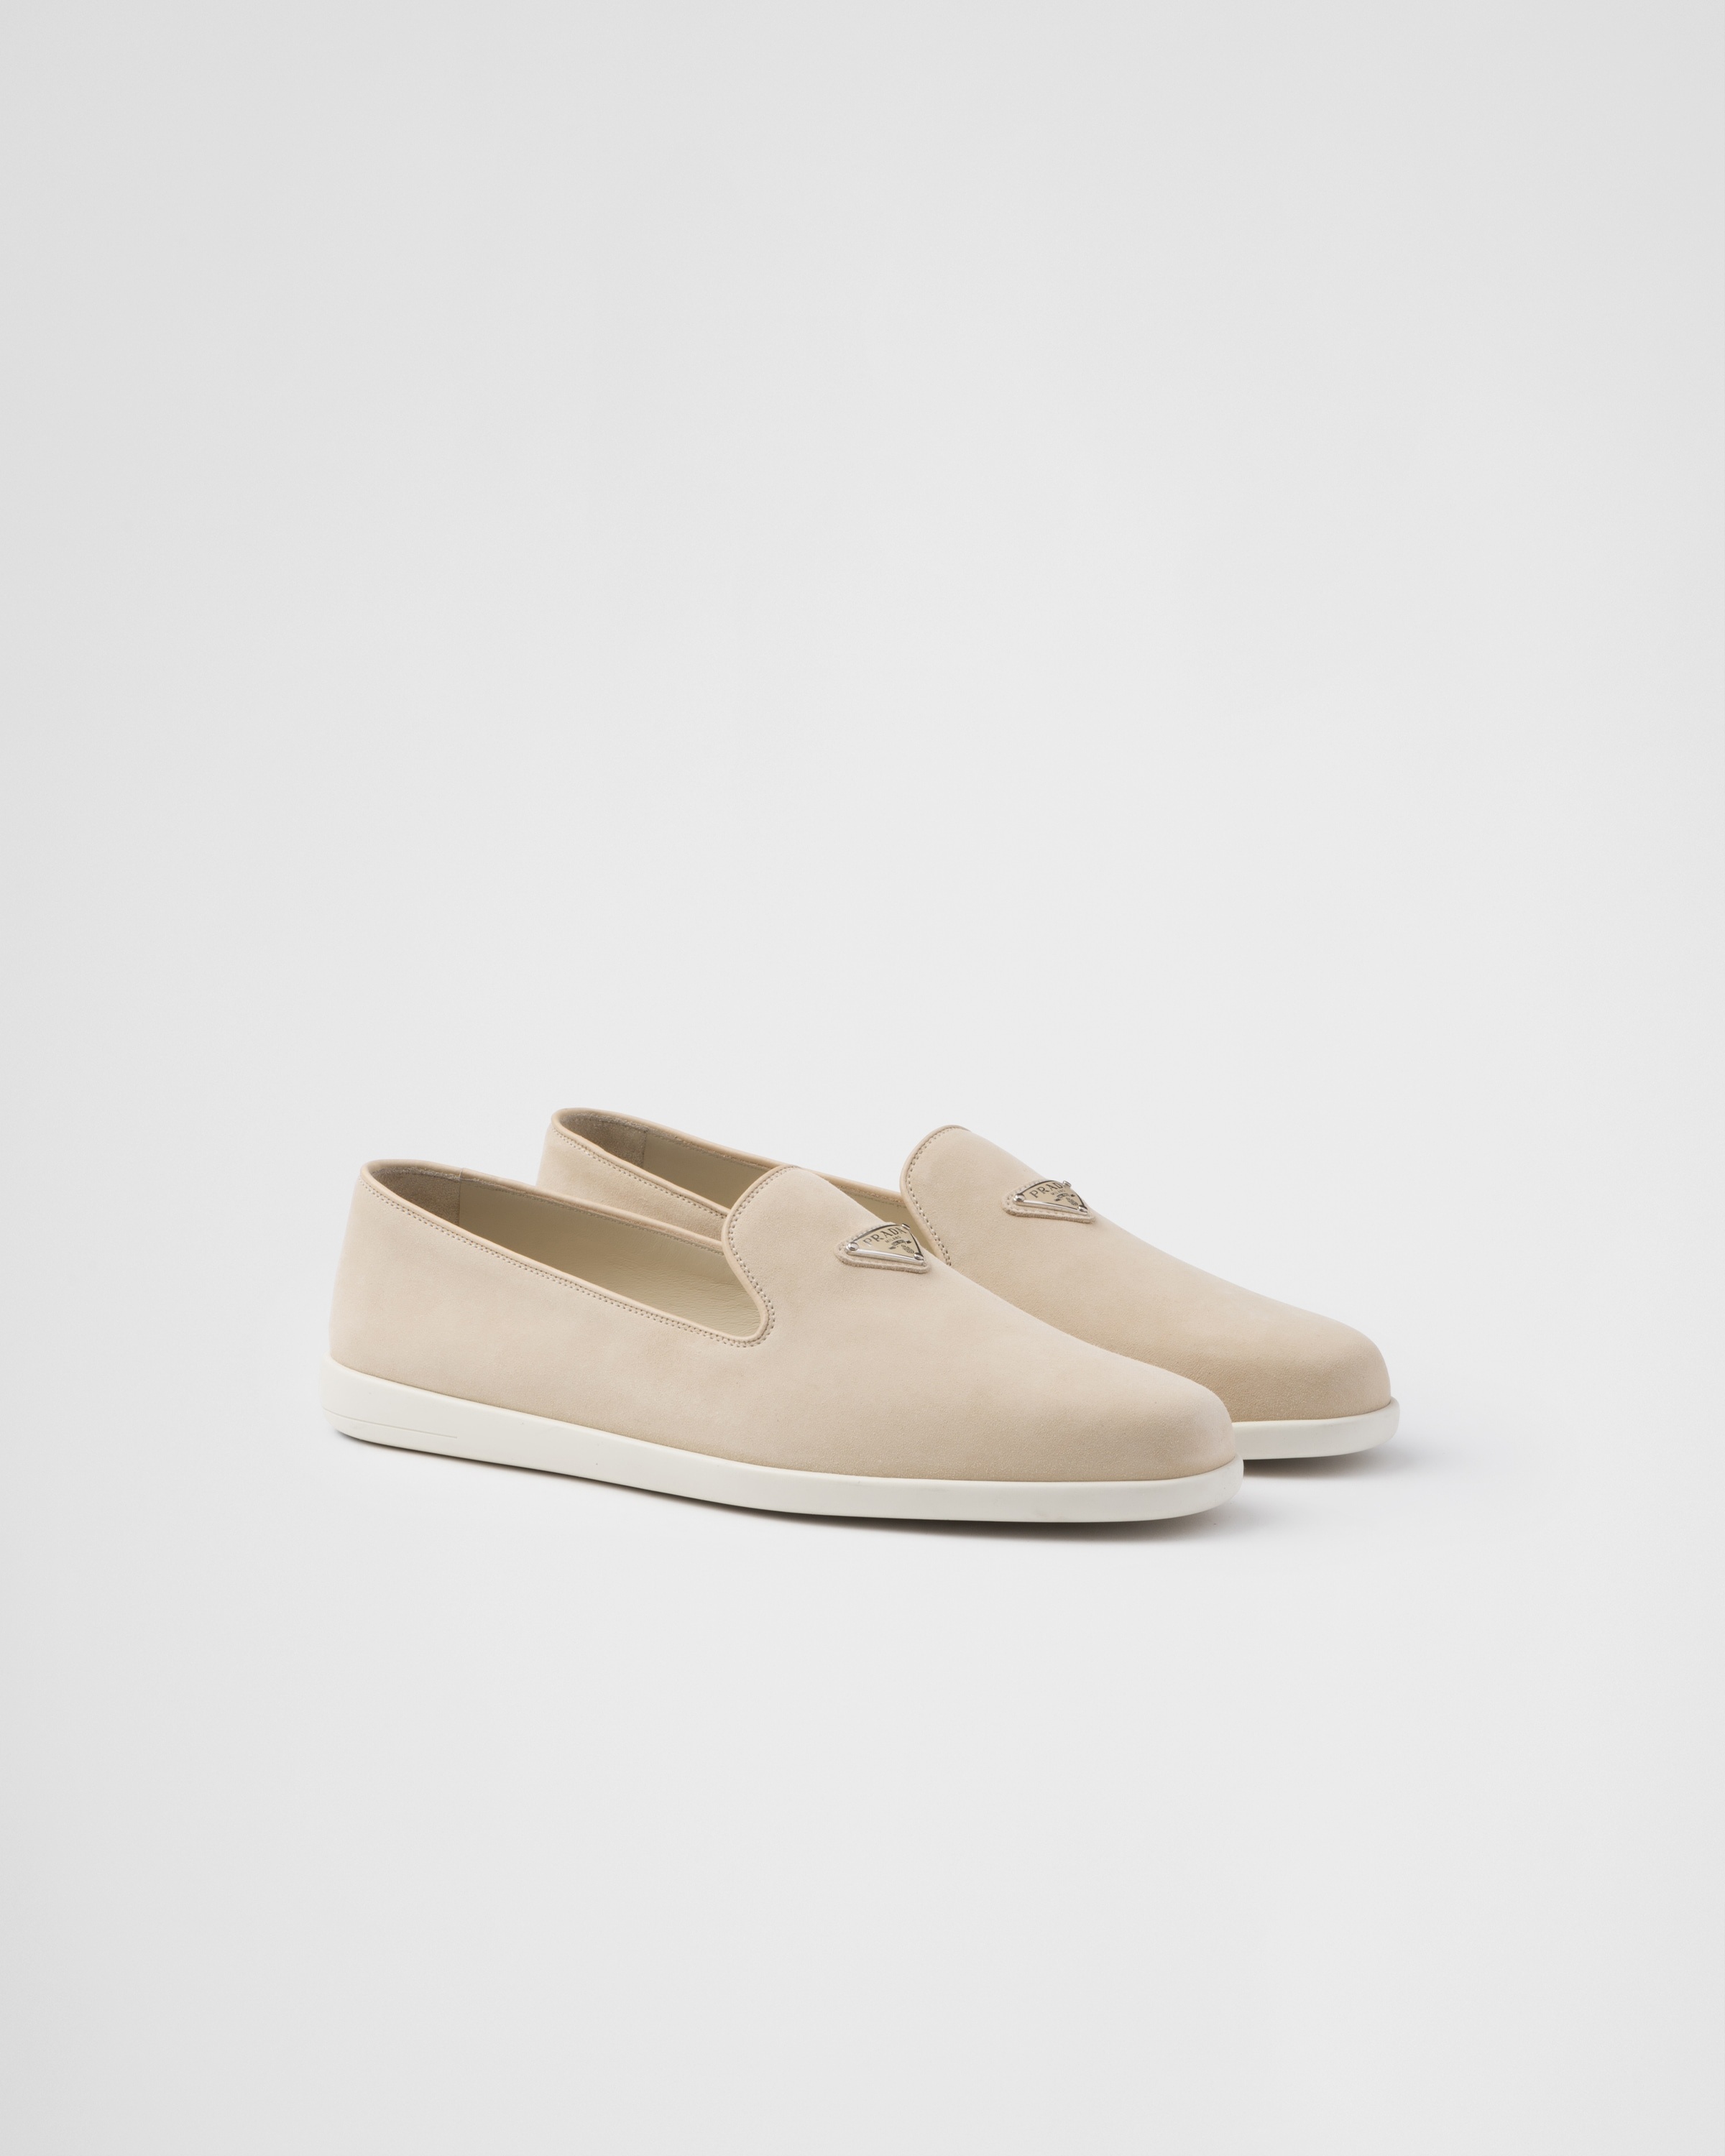 Suede calf leather slip-ons - 1